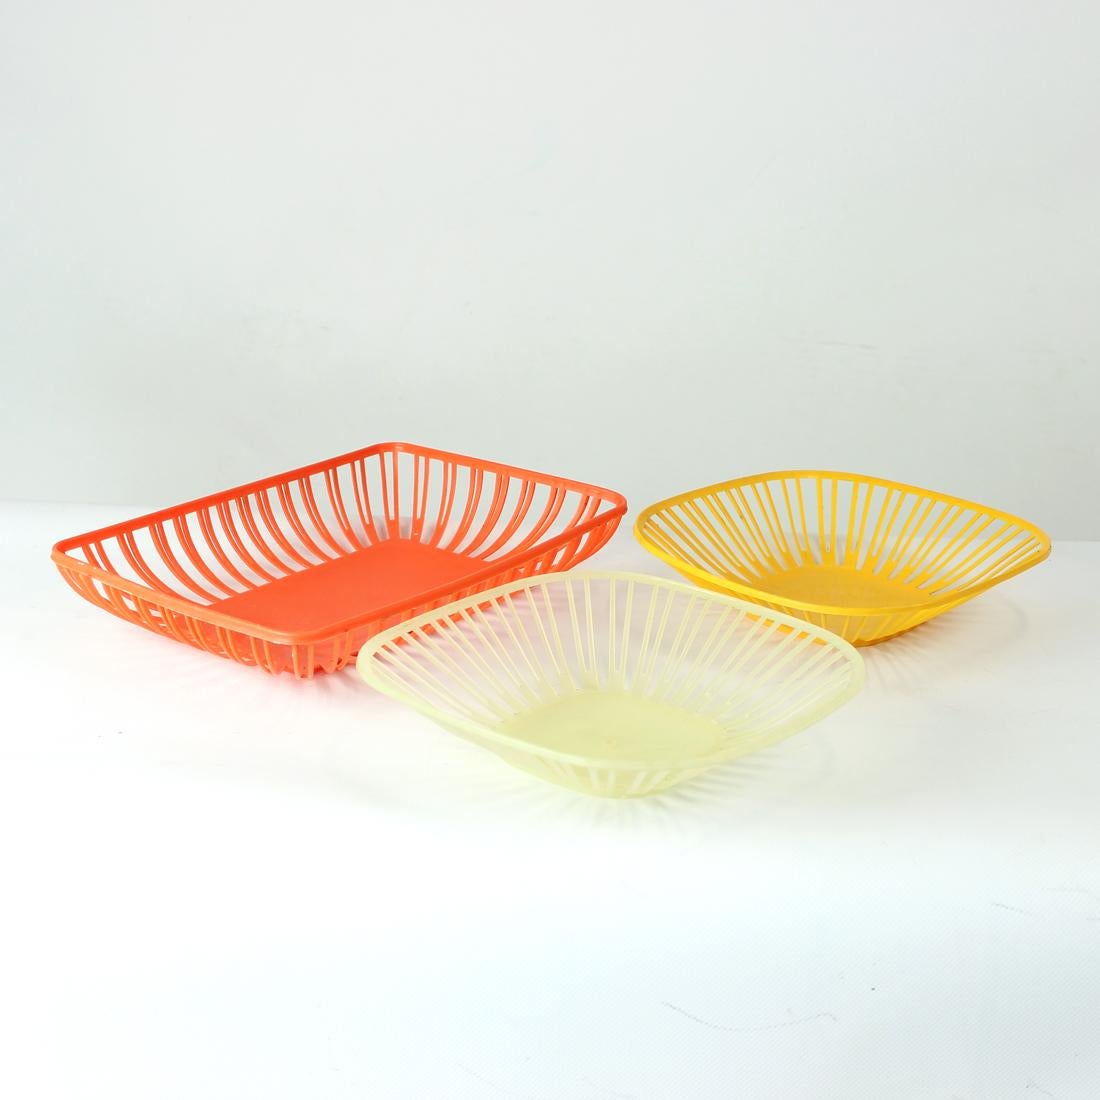 Great vintage kitchen baskets, or serving baskets. Produced in the best of the plastic era of 1960s. The typical mid-century vibe just oozes through these great baskets. They are in nearly perfect condition and fully functional. Produced in